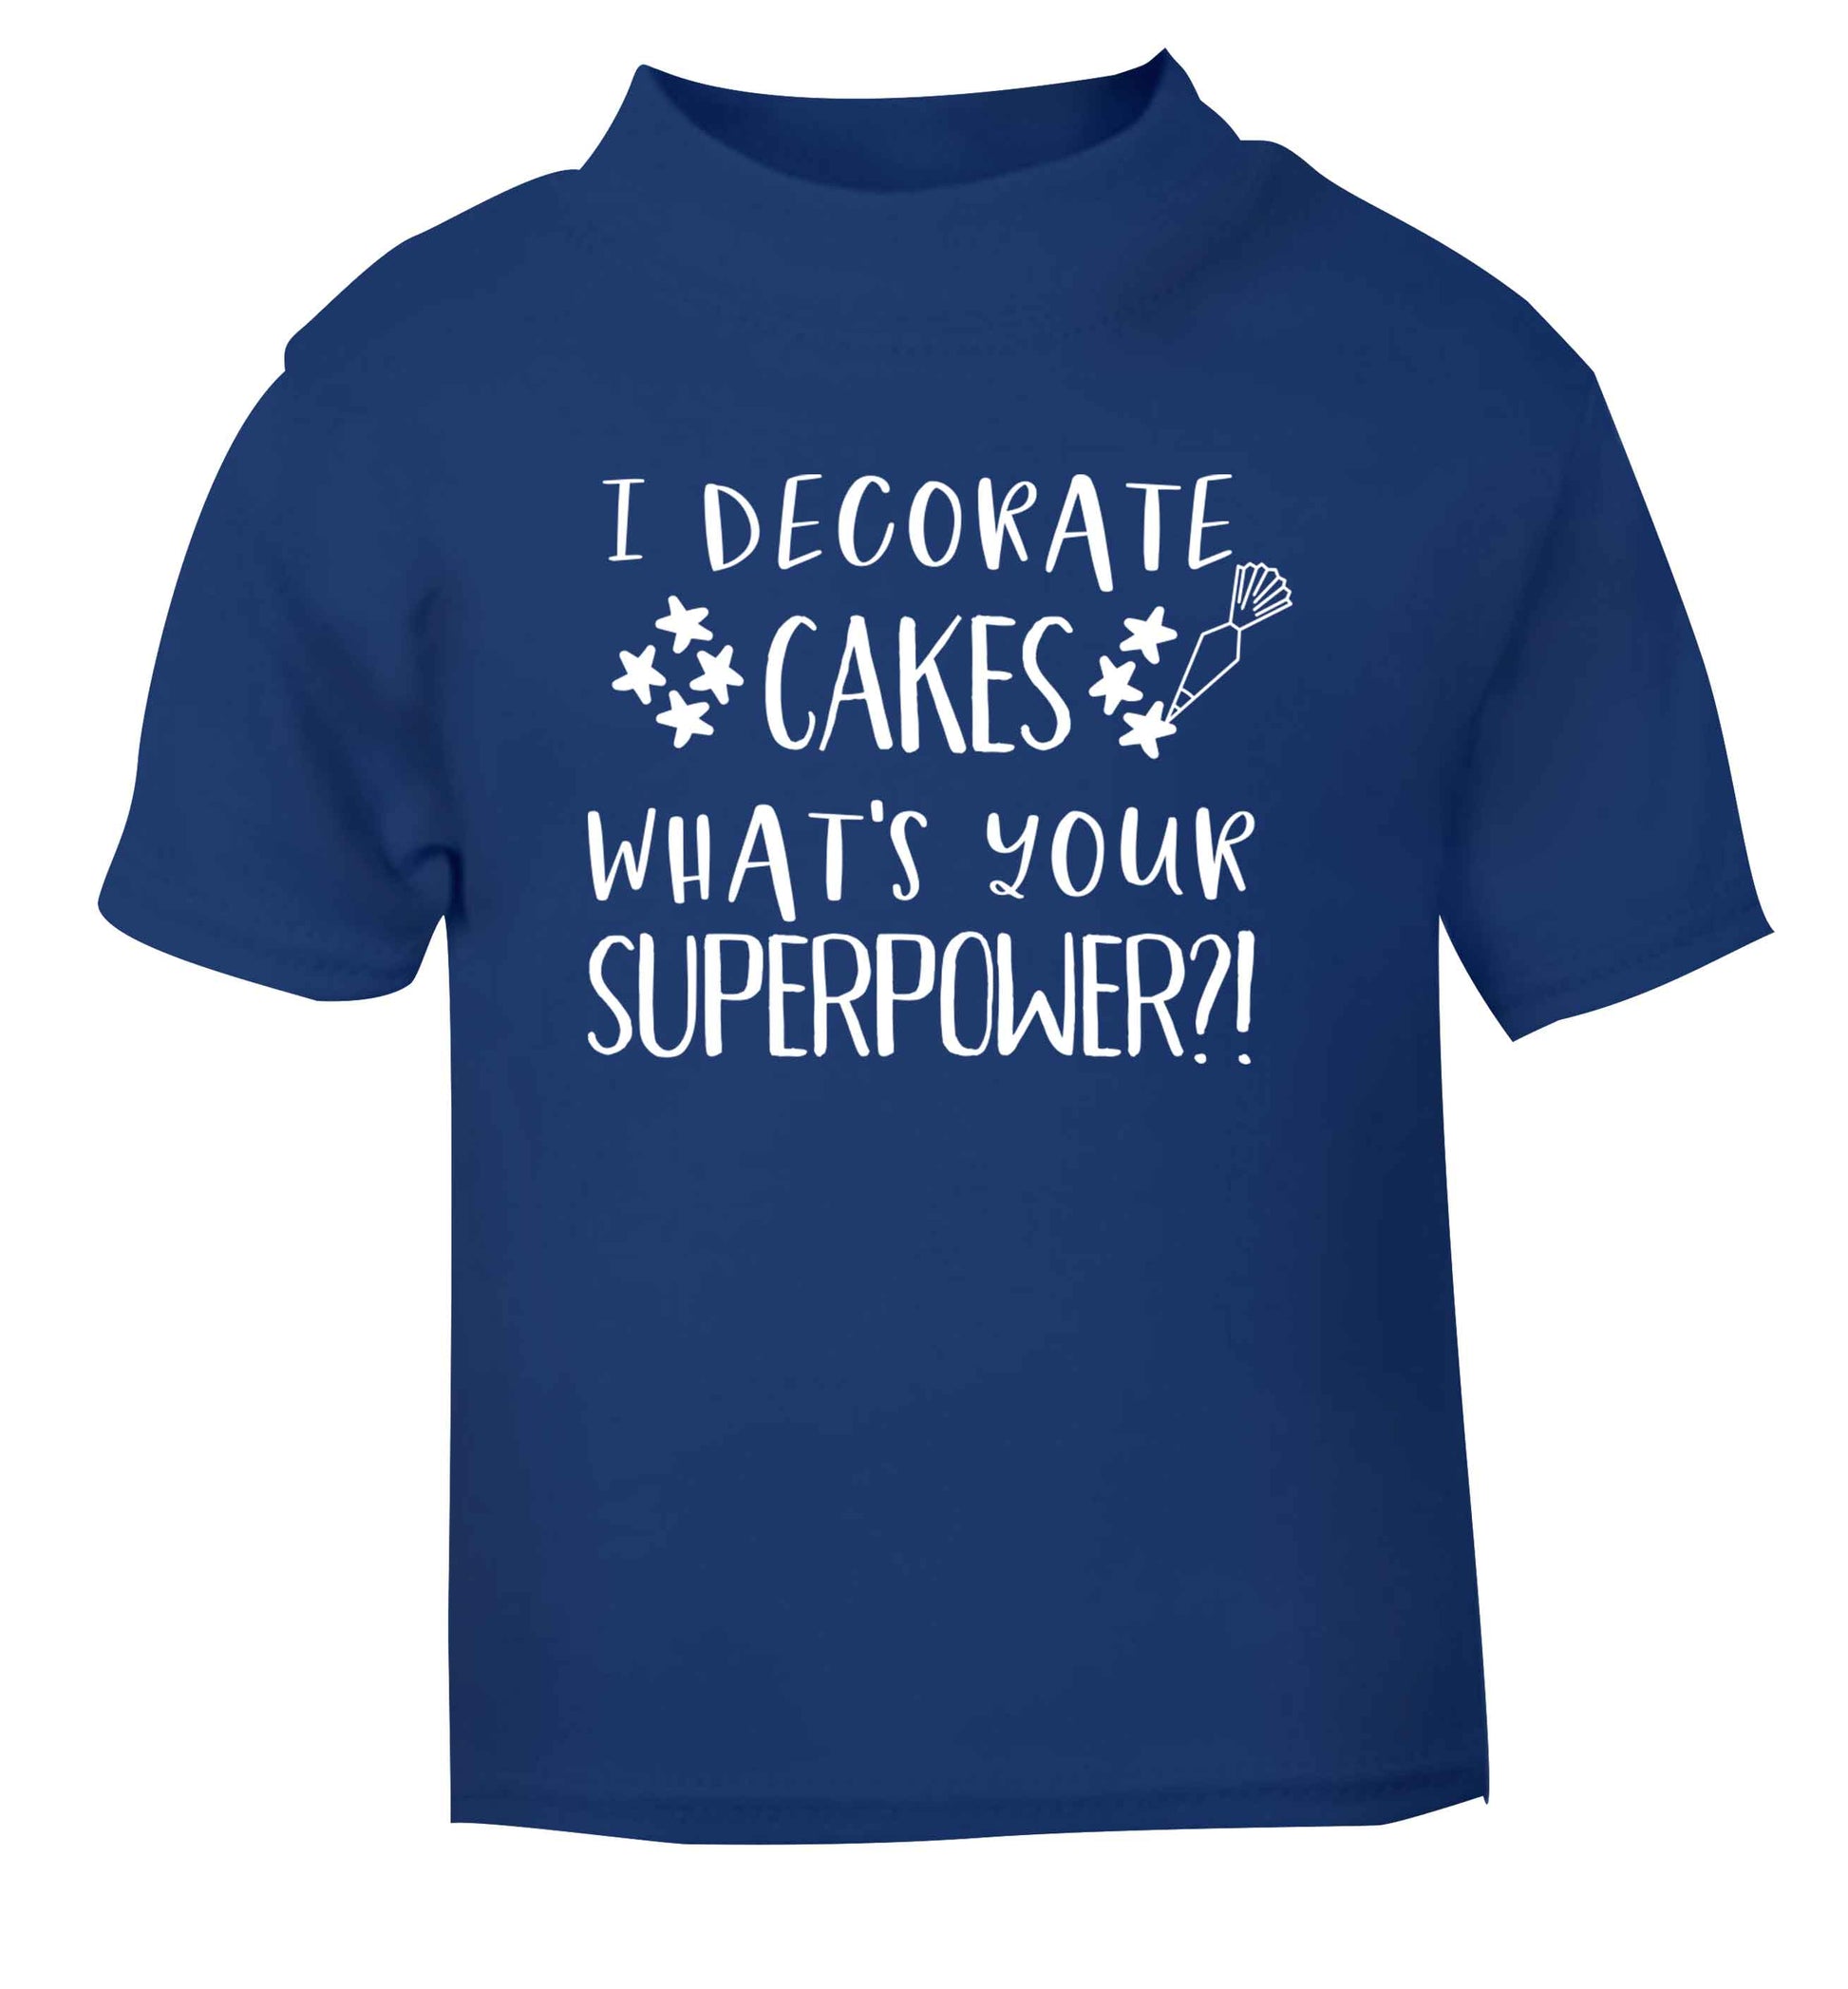 I decorate cakes what's your superpower?! blue Baby Toddler Tshirt 2 Years